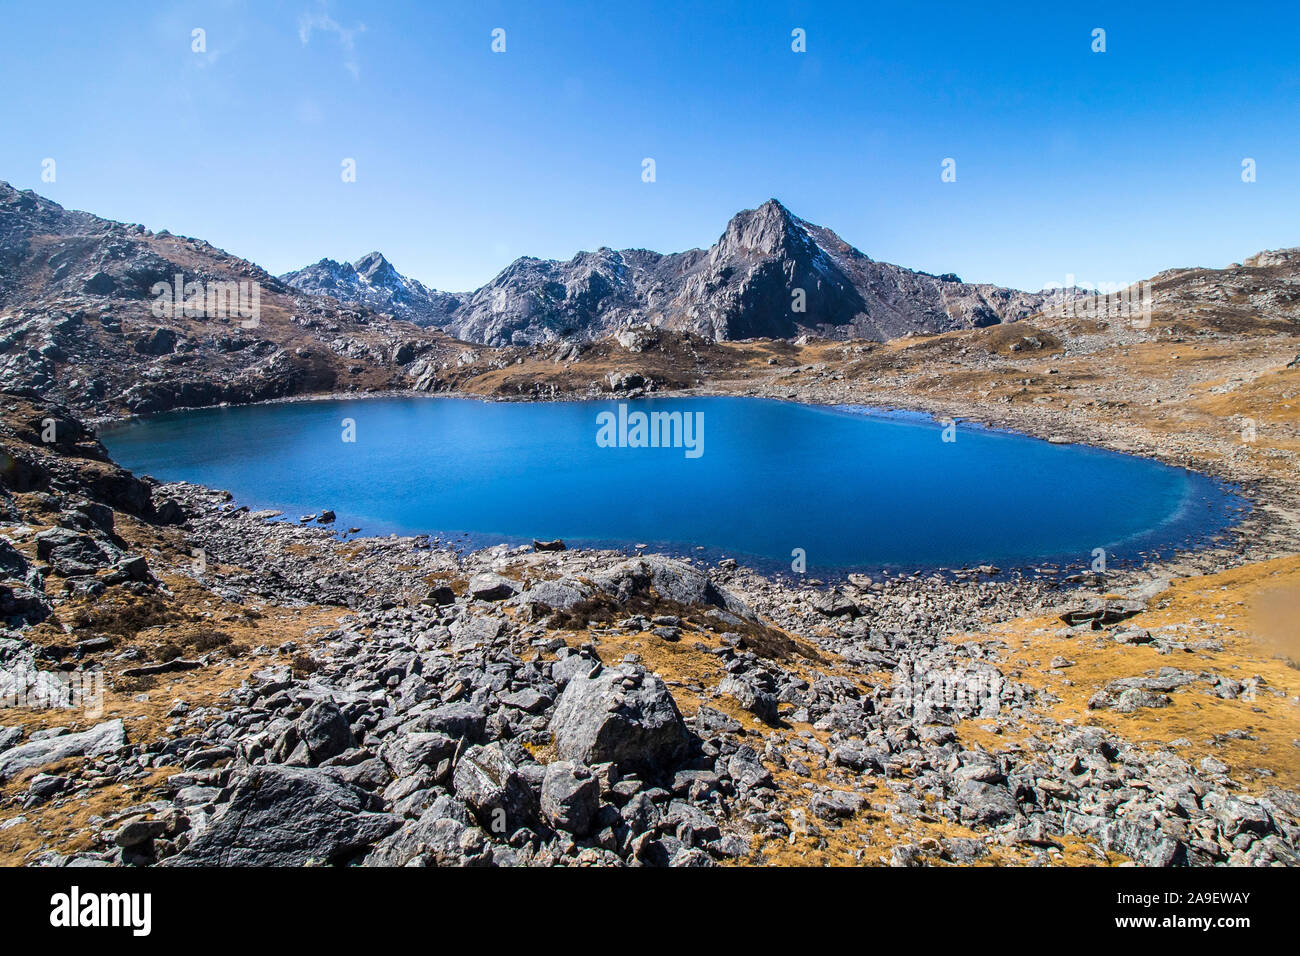 One of the big lakes in Gosaikunda as viewed from Suryakunda at 4610m above sea level Stock Photo